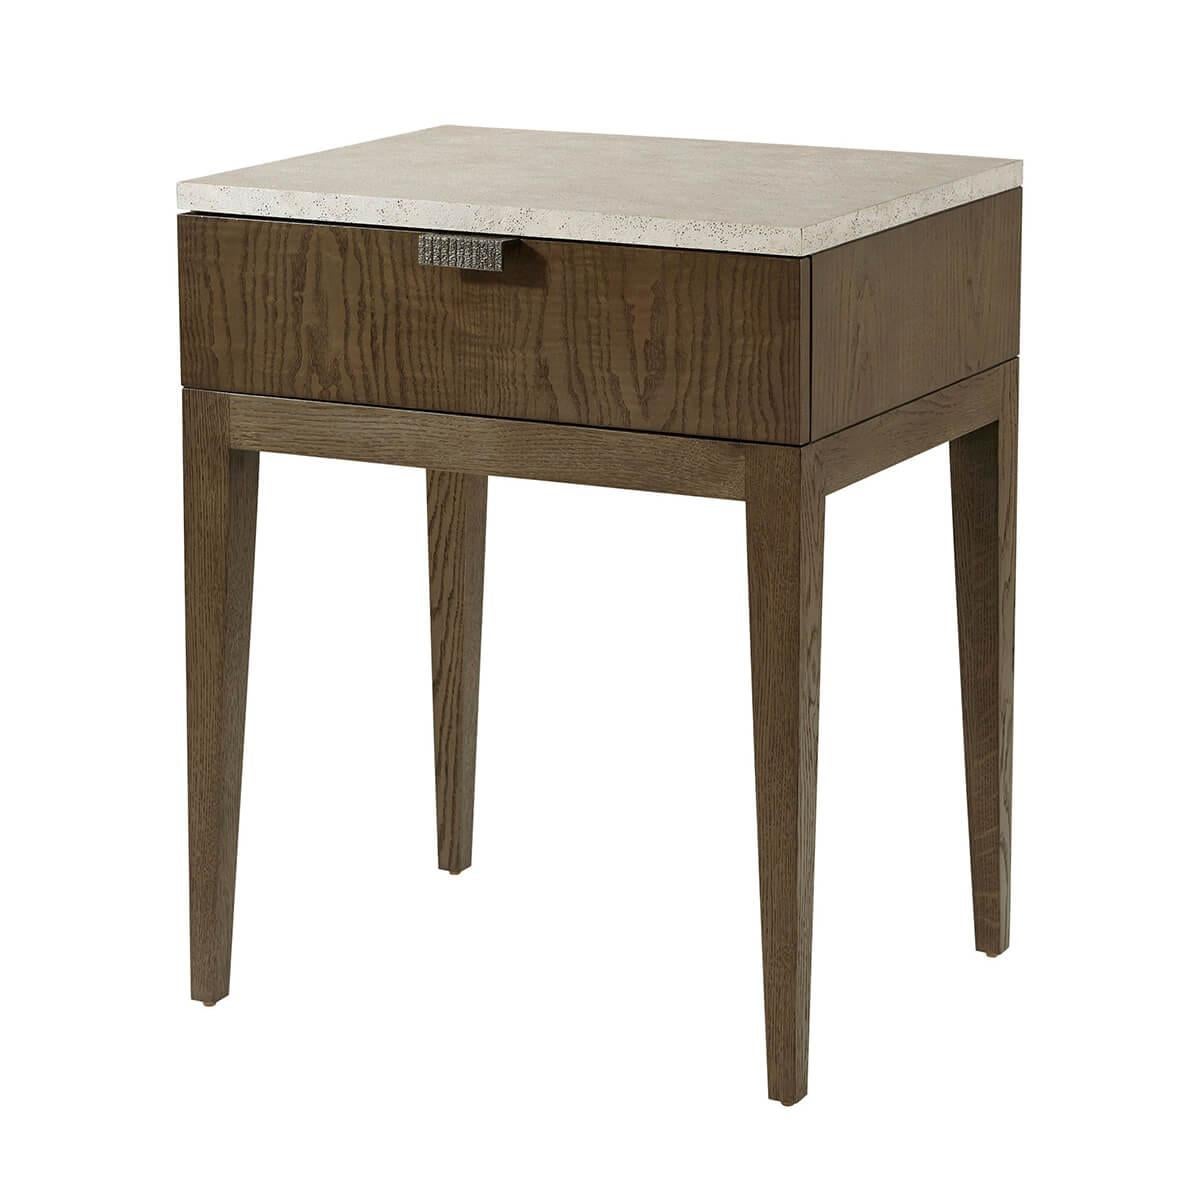 A modern single drawer nightstand perfect for any bedroom. Seen here in clean-cut figured ash in our dark earth finish with a textured metal pull in Ember finish. Completed with a stone-like porous top in our exclusive Mineral finish.

Dimensions: